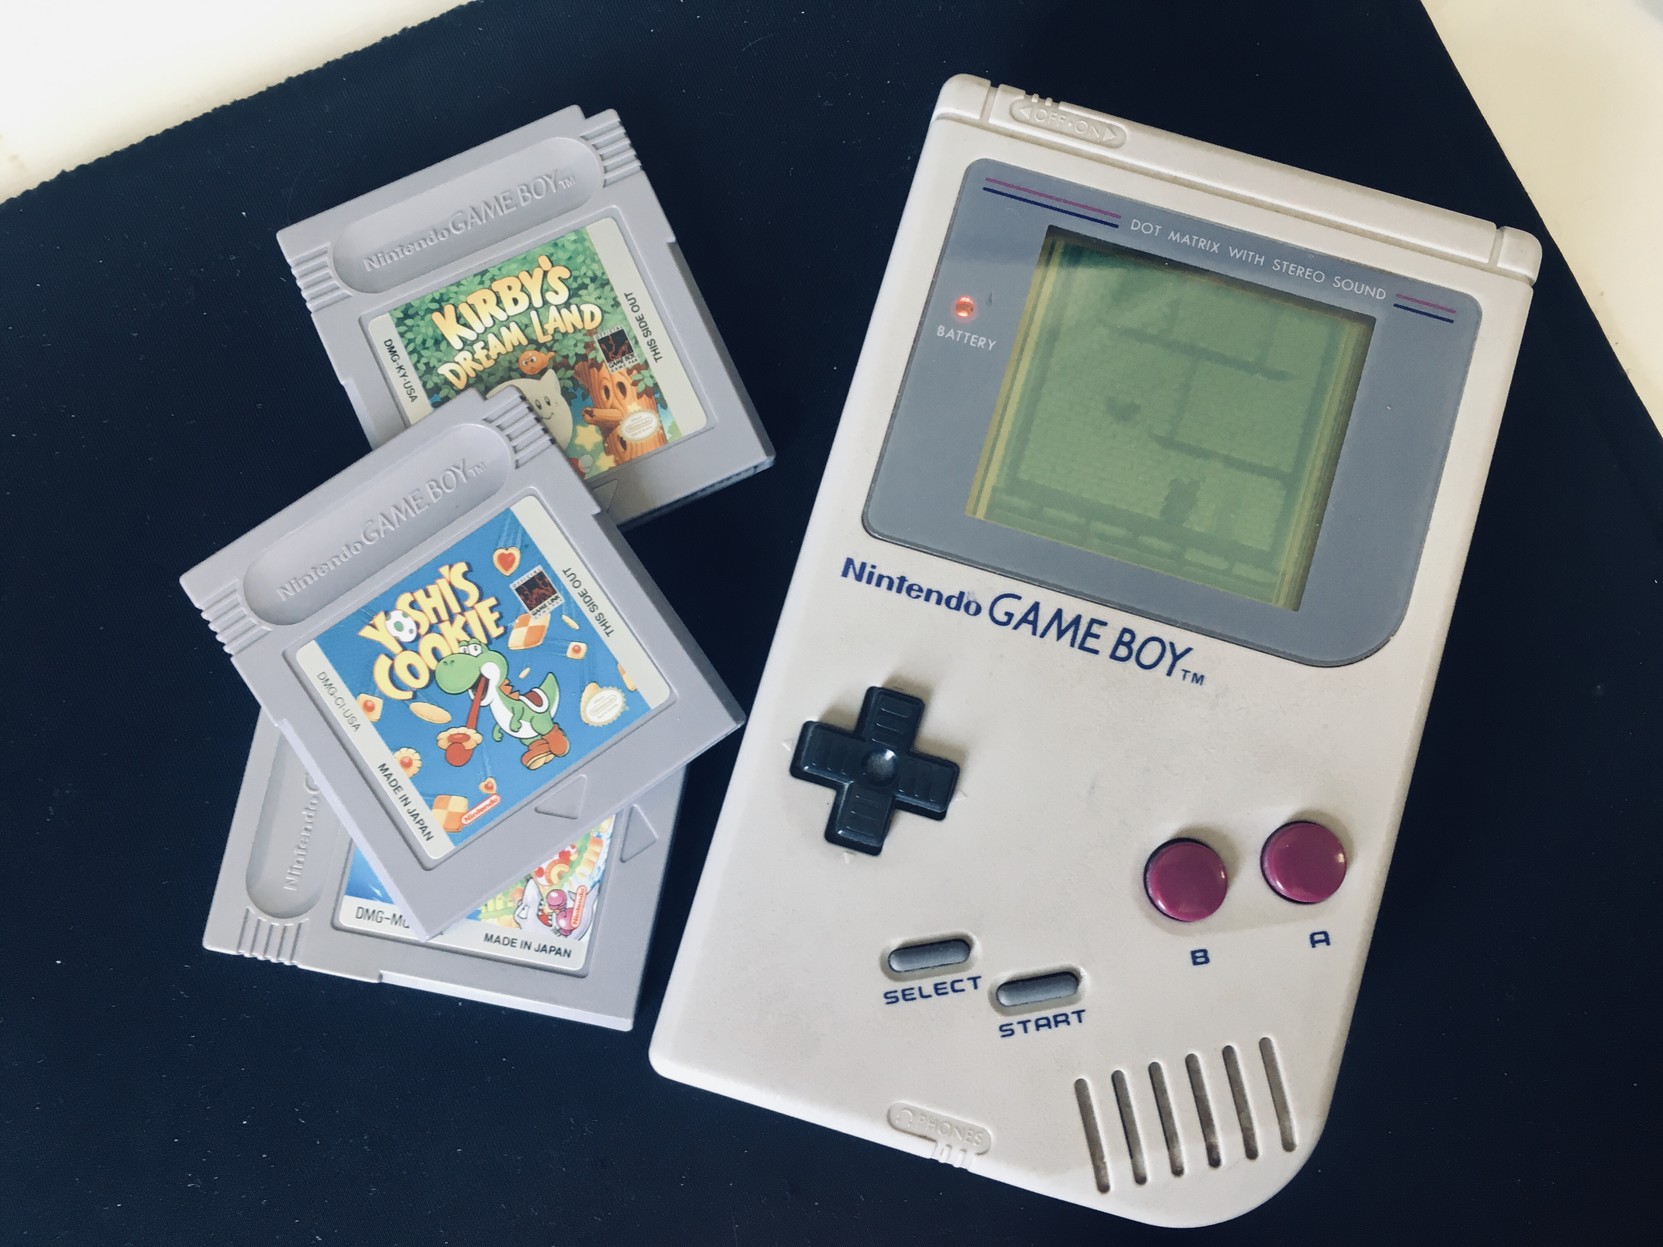 Game Boy console and some game cartridges